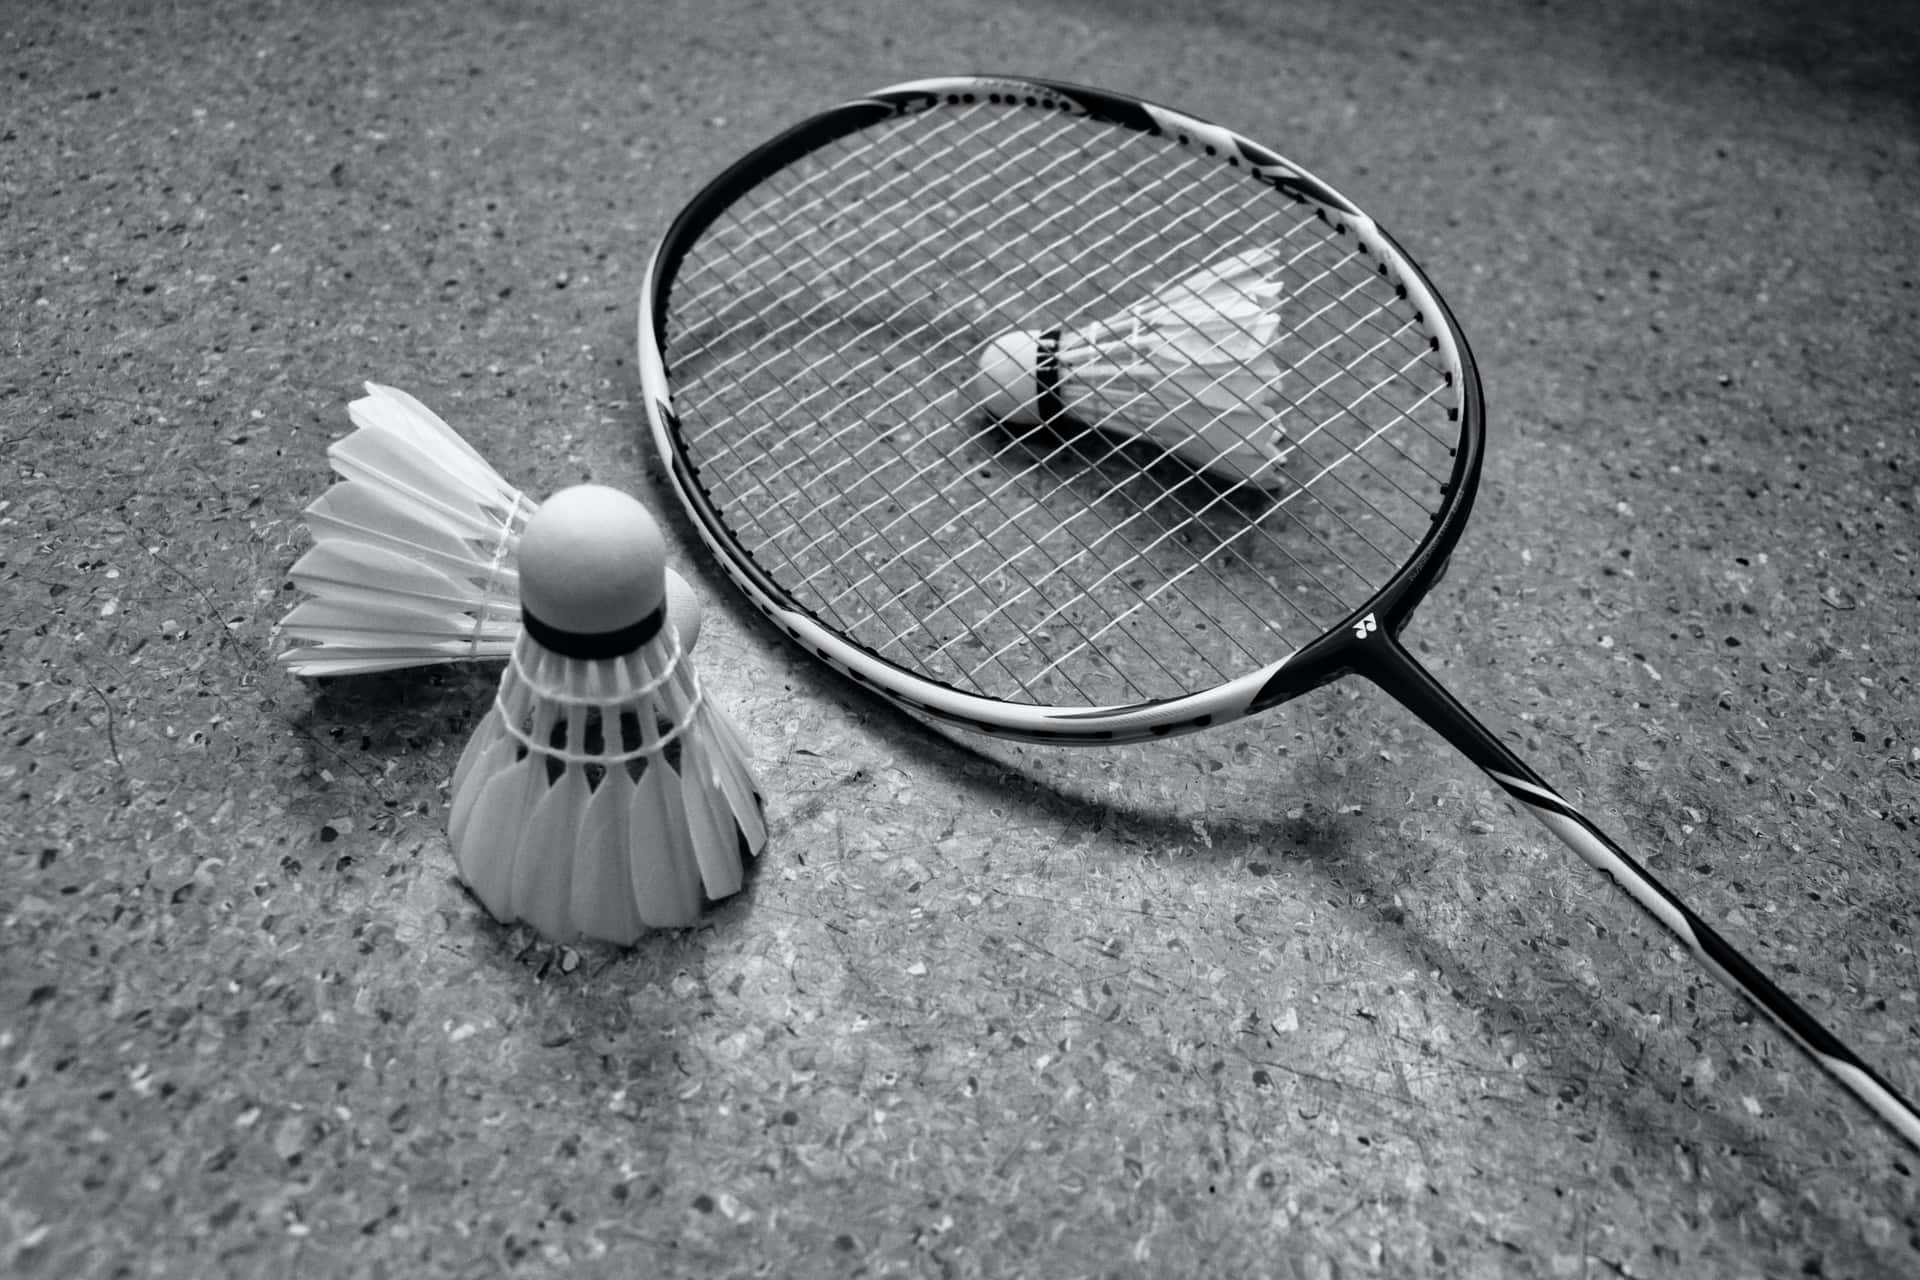 A highly competitive badminton match